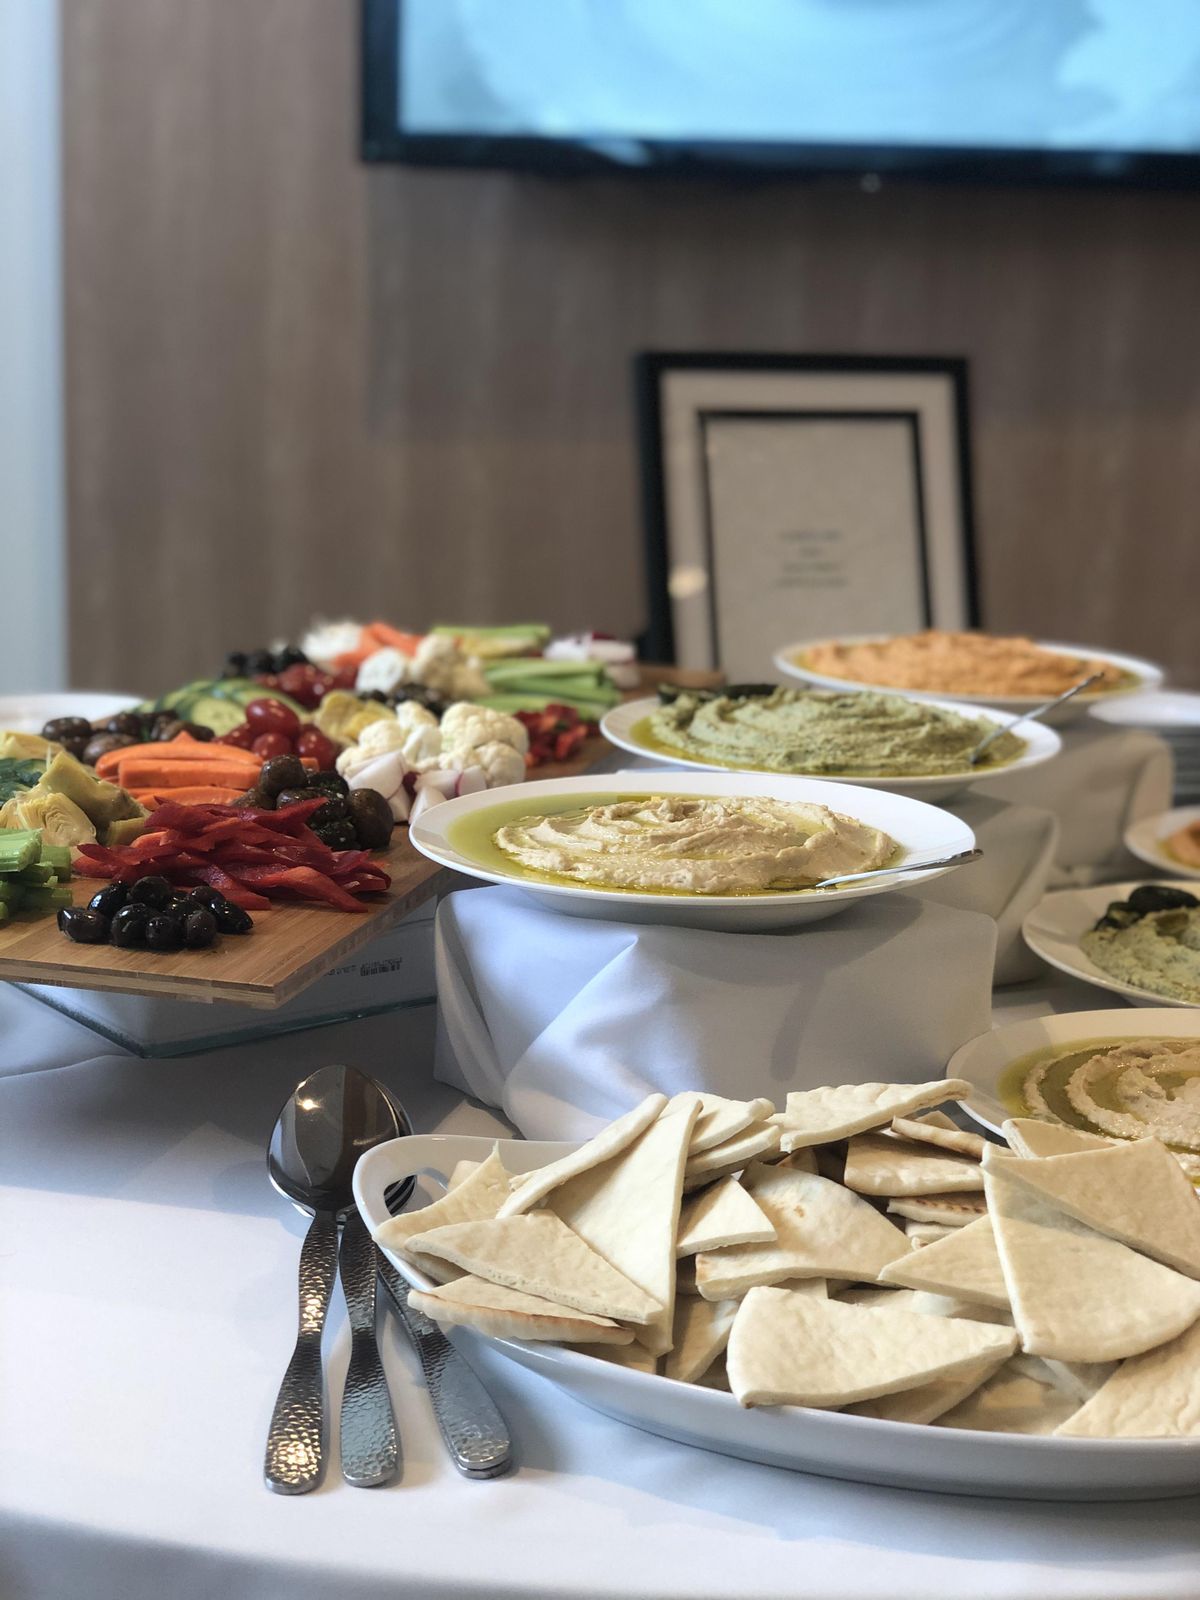 Celebrity chef Beau MacMillan created the menu for the restaurants at Revel Spokane retirement community. This hummus platter was featured at the retirement community’s grand opening celebration. (Courtesy photo / Revel Spokane)